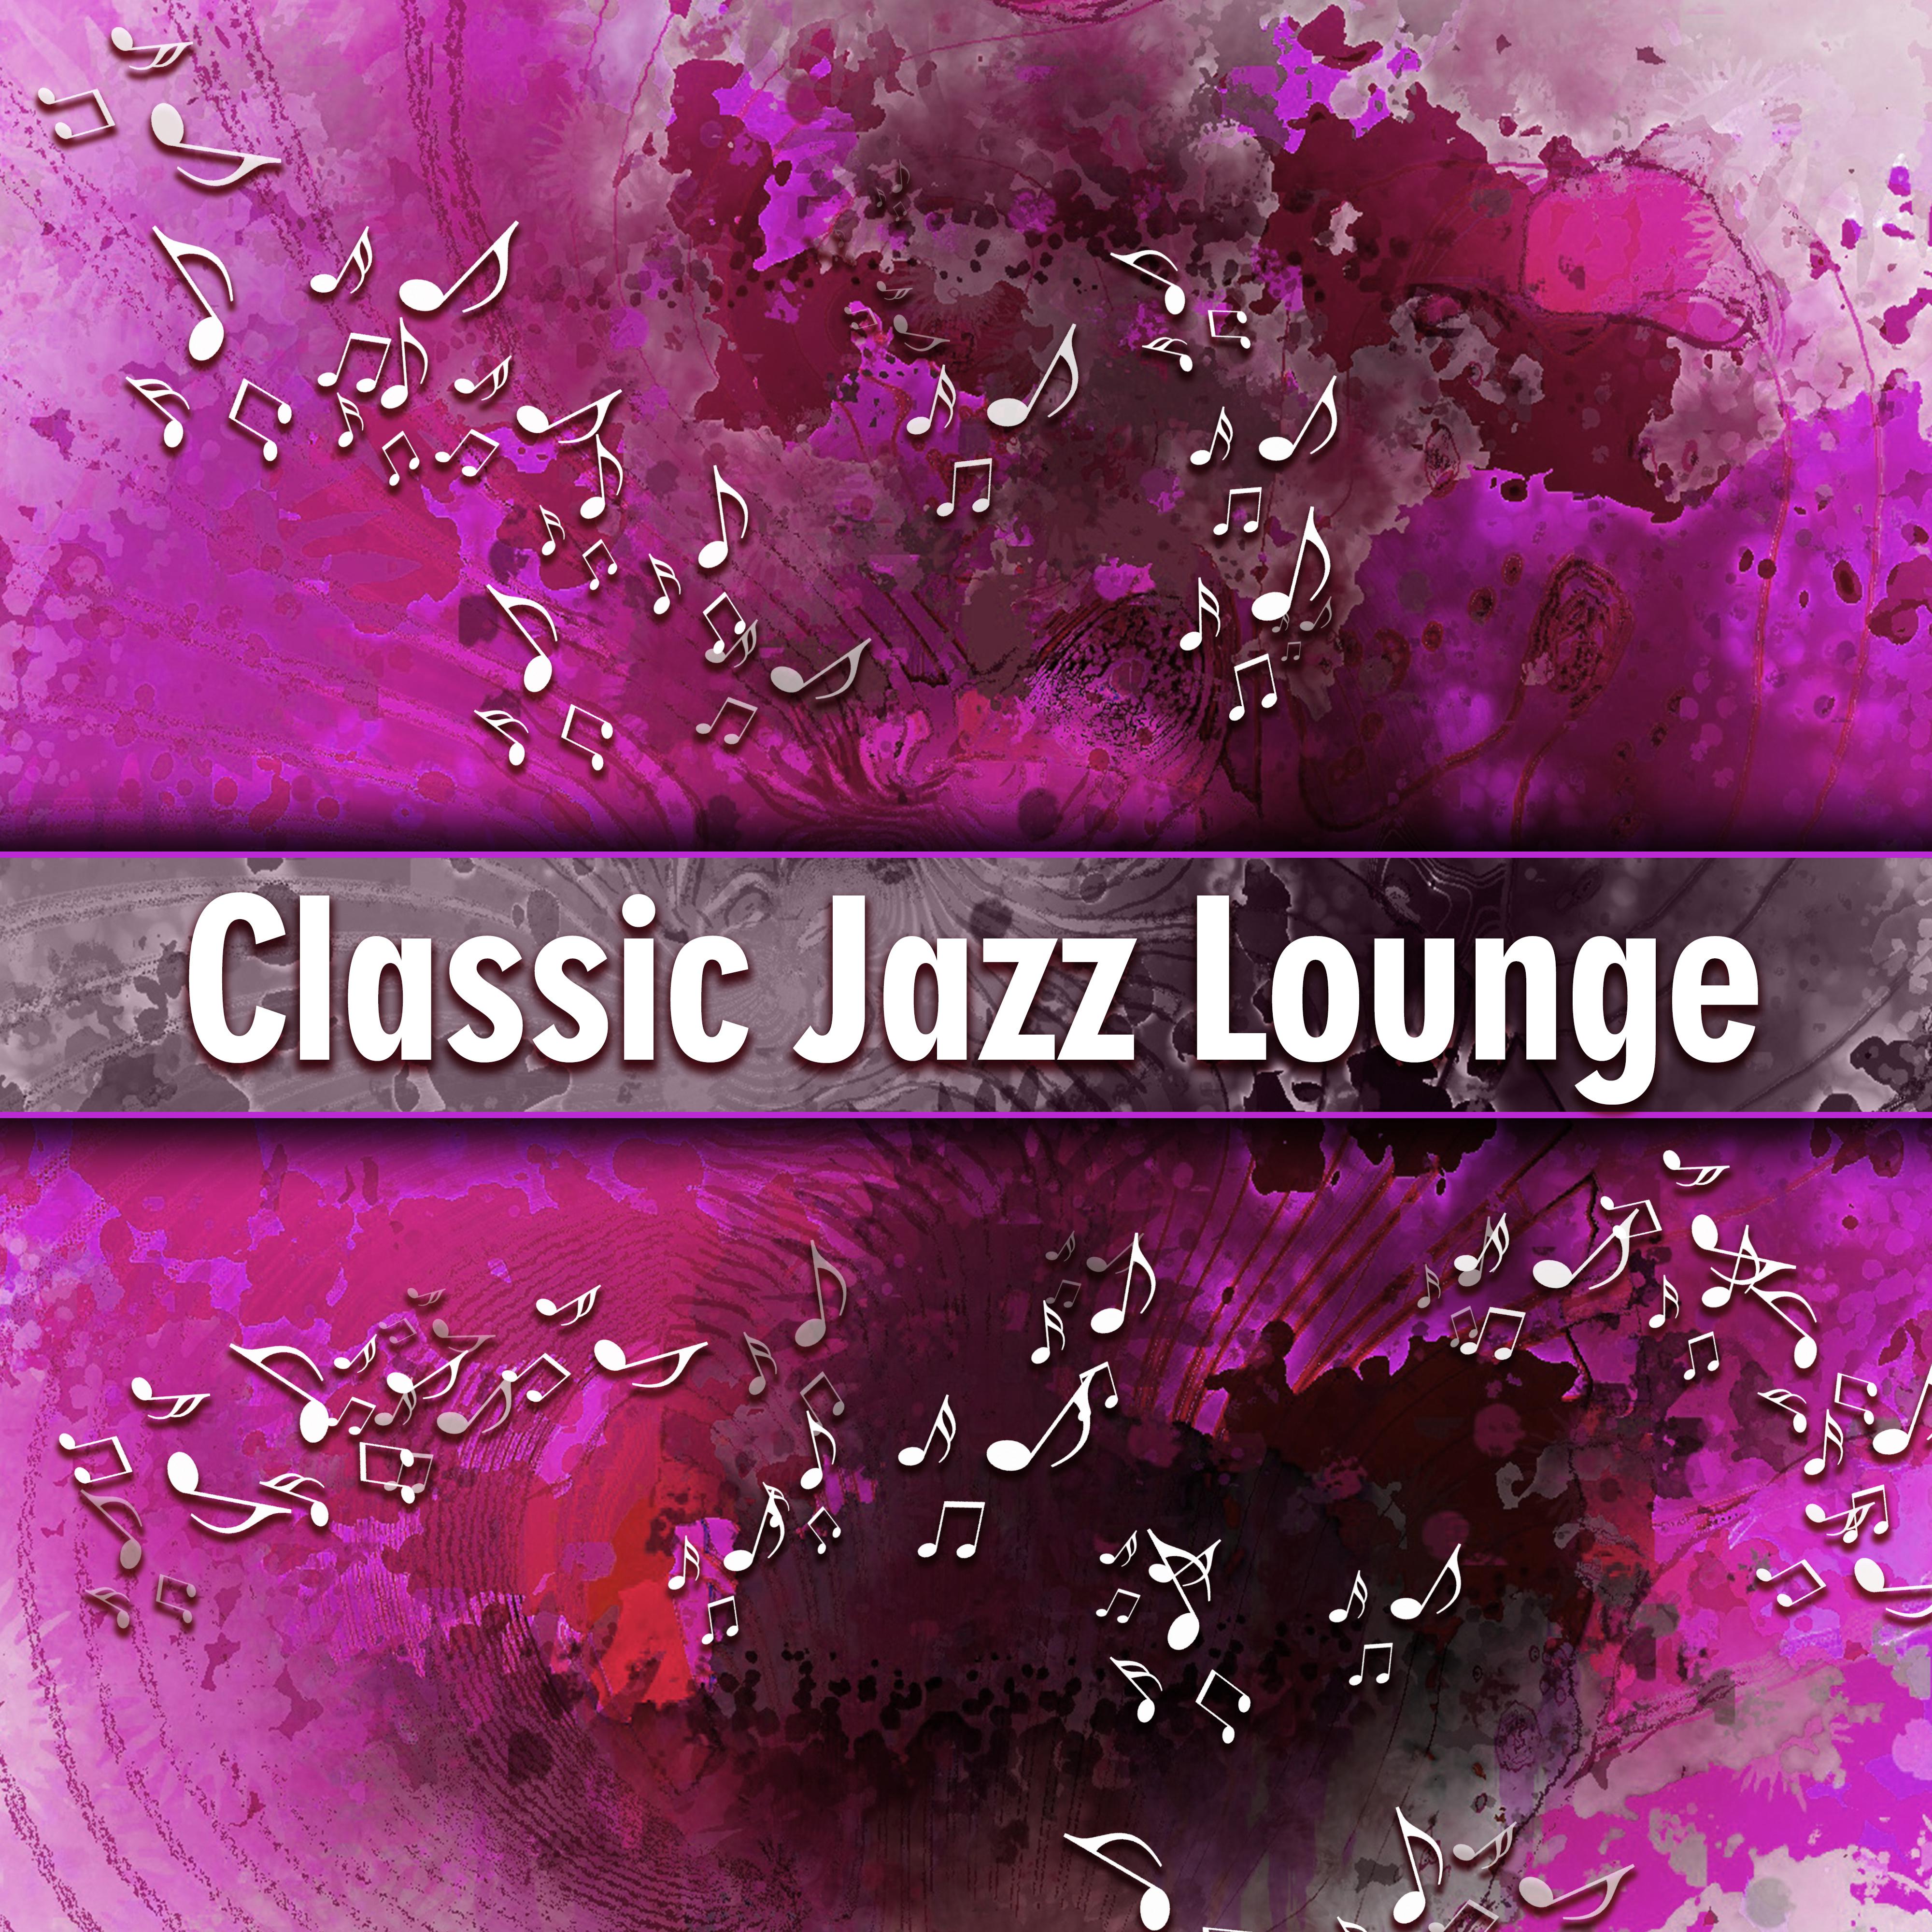 Classic Jazz Lounge – Ambient Instrumental Music, Smooth Jazz, Simple Piano Songs